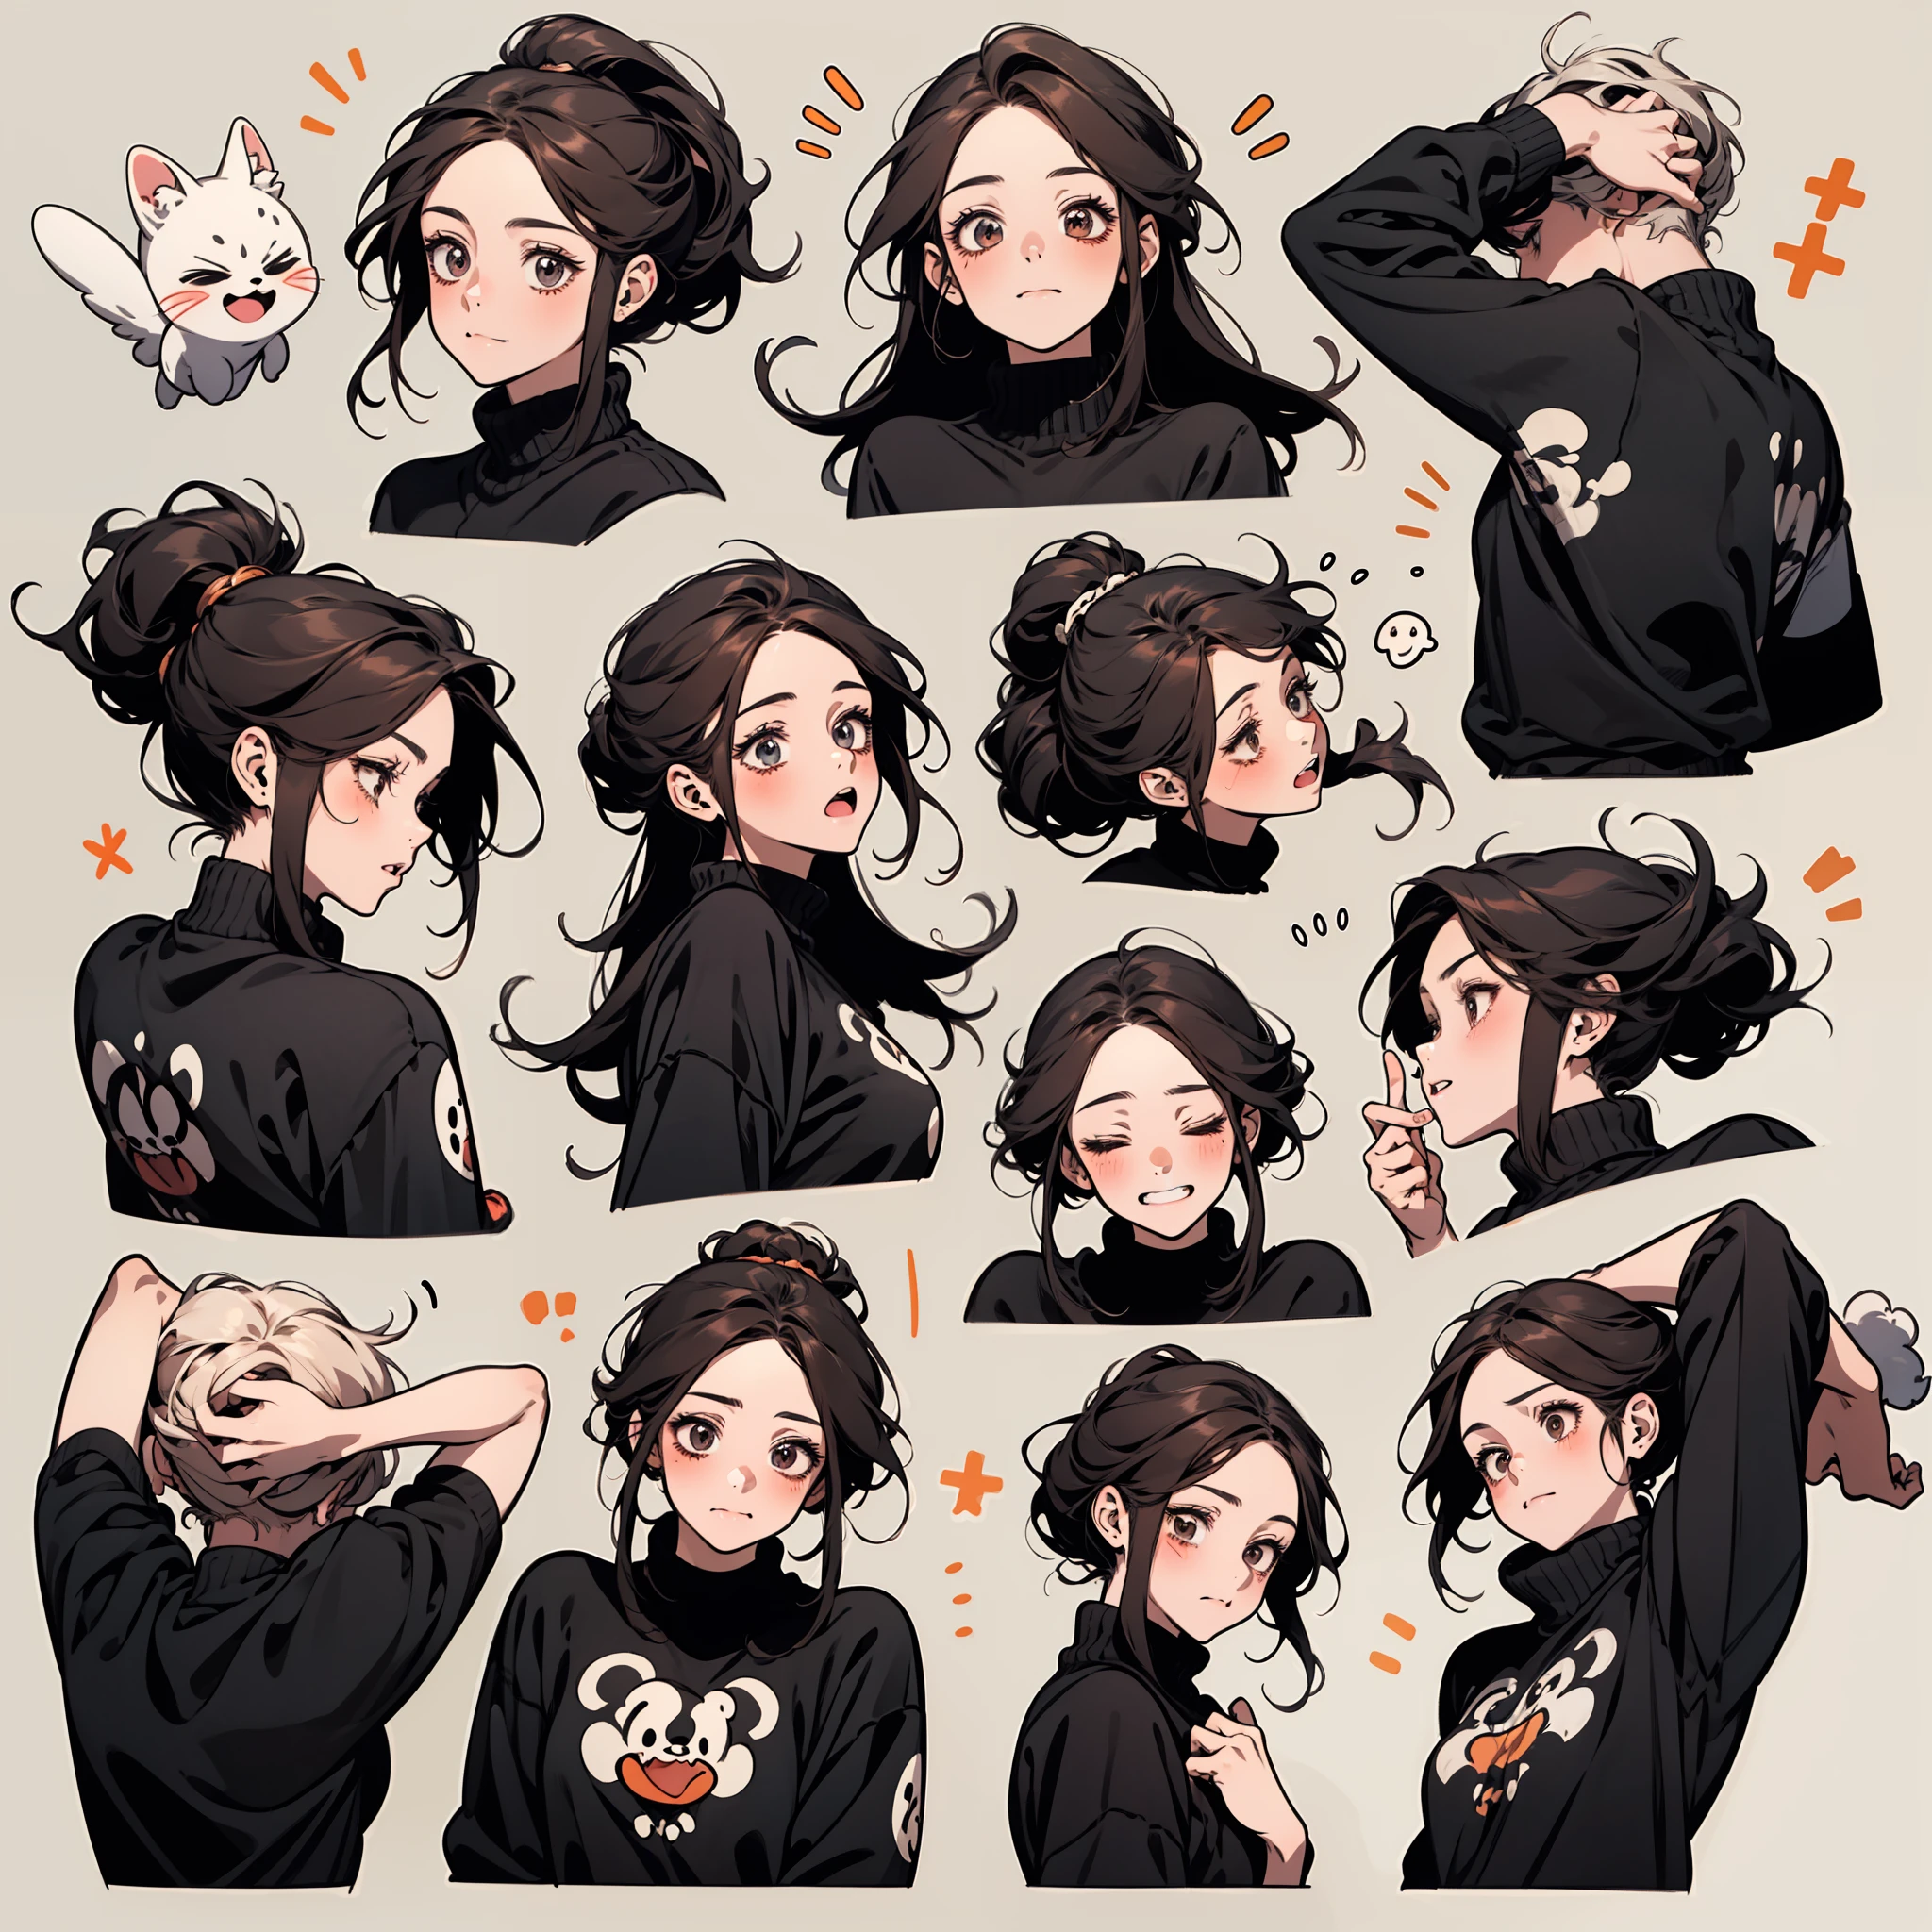 Cute girl avatar，emoji pack，9 emojis，emoji sheet，Align arrangement，Multiple Poses and Expression（Grieving，astonishment，having fun，excitement，big laughter，Touch your head，Sell moe, wait），Anthropomorphic style，Disney style，Black strokes，Different emotionultiple Poses and Expression，8K